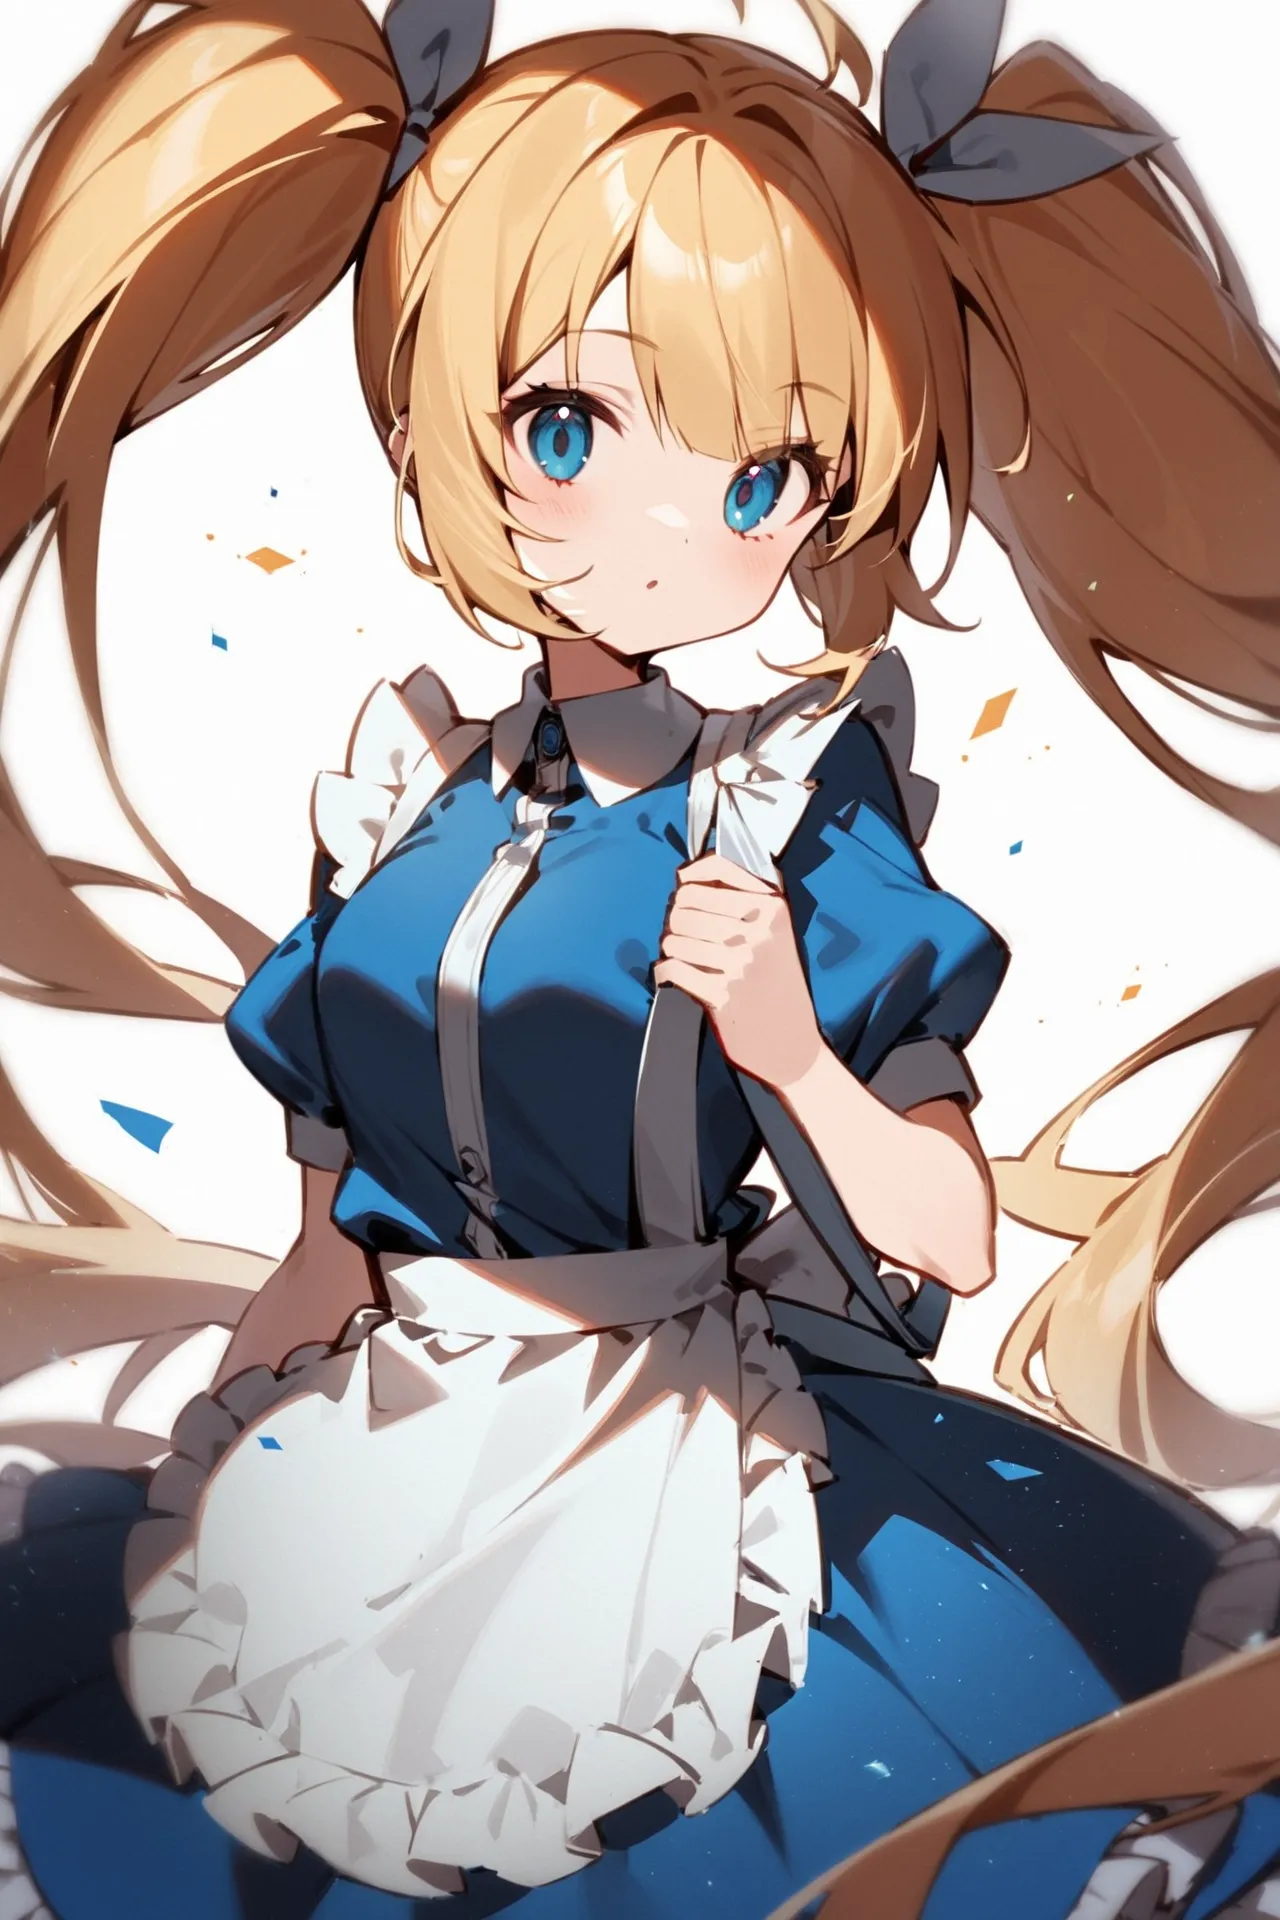 '1girl, holding strap,\nblonde hair, twintails, blue dress, white apron,\nwhite background,\nAlice in glitterworld\nNegative prompt: (worst quality, low quality:1.4), nsfw\nSteps: 35, Sampler: DPM++ 2M SDE Karras, CFG scale: 7, Seed: 1, Size: 640x960, Model hash: 642b08ca49, Model: ConfusionXL2.0_fp16_vae, VAE hash: 63aeecb90f, VAE: sdxl_vae_0.9.safetensors, Denoising strength: 0.6, Clip skip: 2, Hires upscale: 2, Hires steps: 15, Hires upscaler: ESRGAN_4x, Eta: 0.68, Version: v1.7.0'